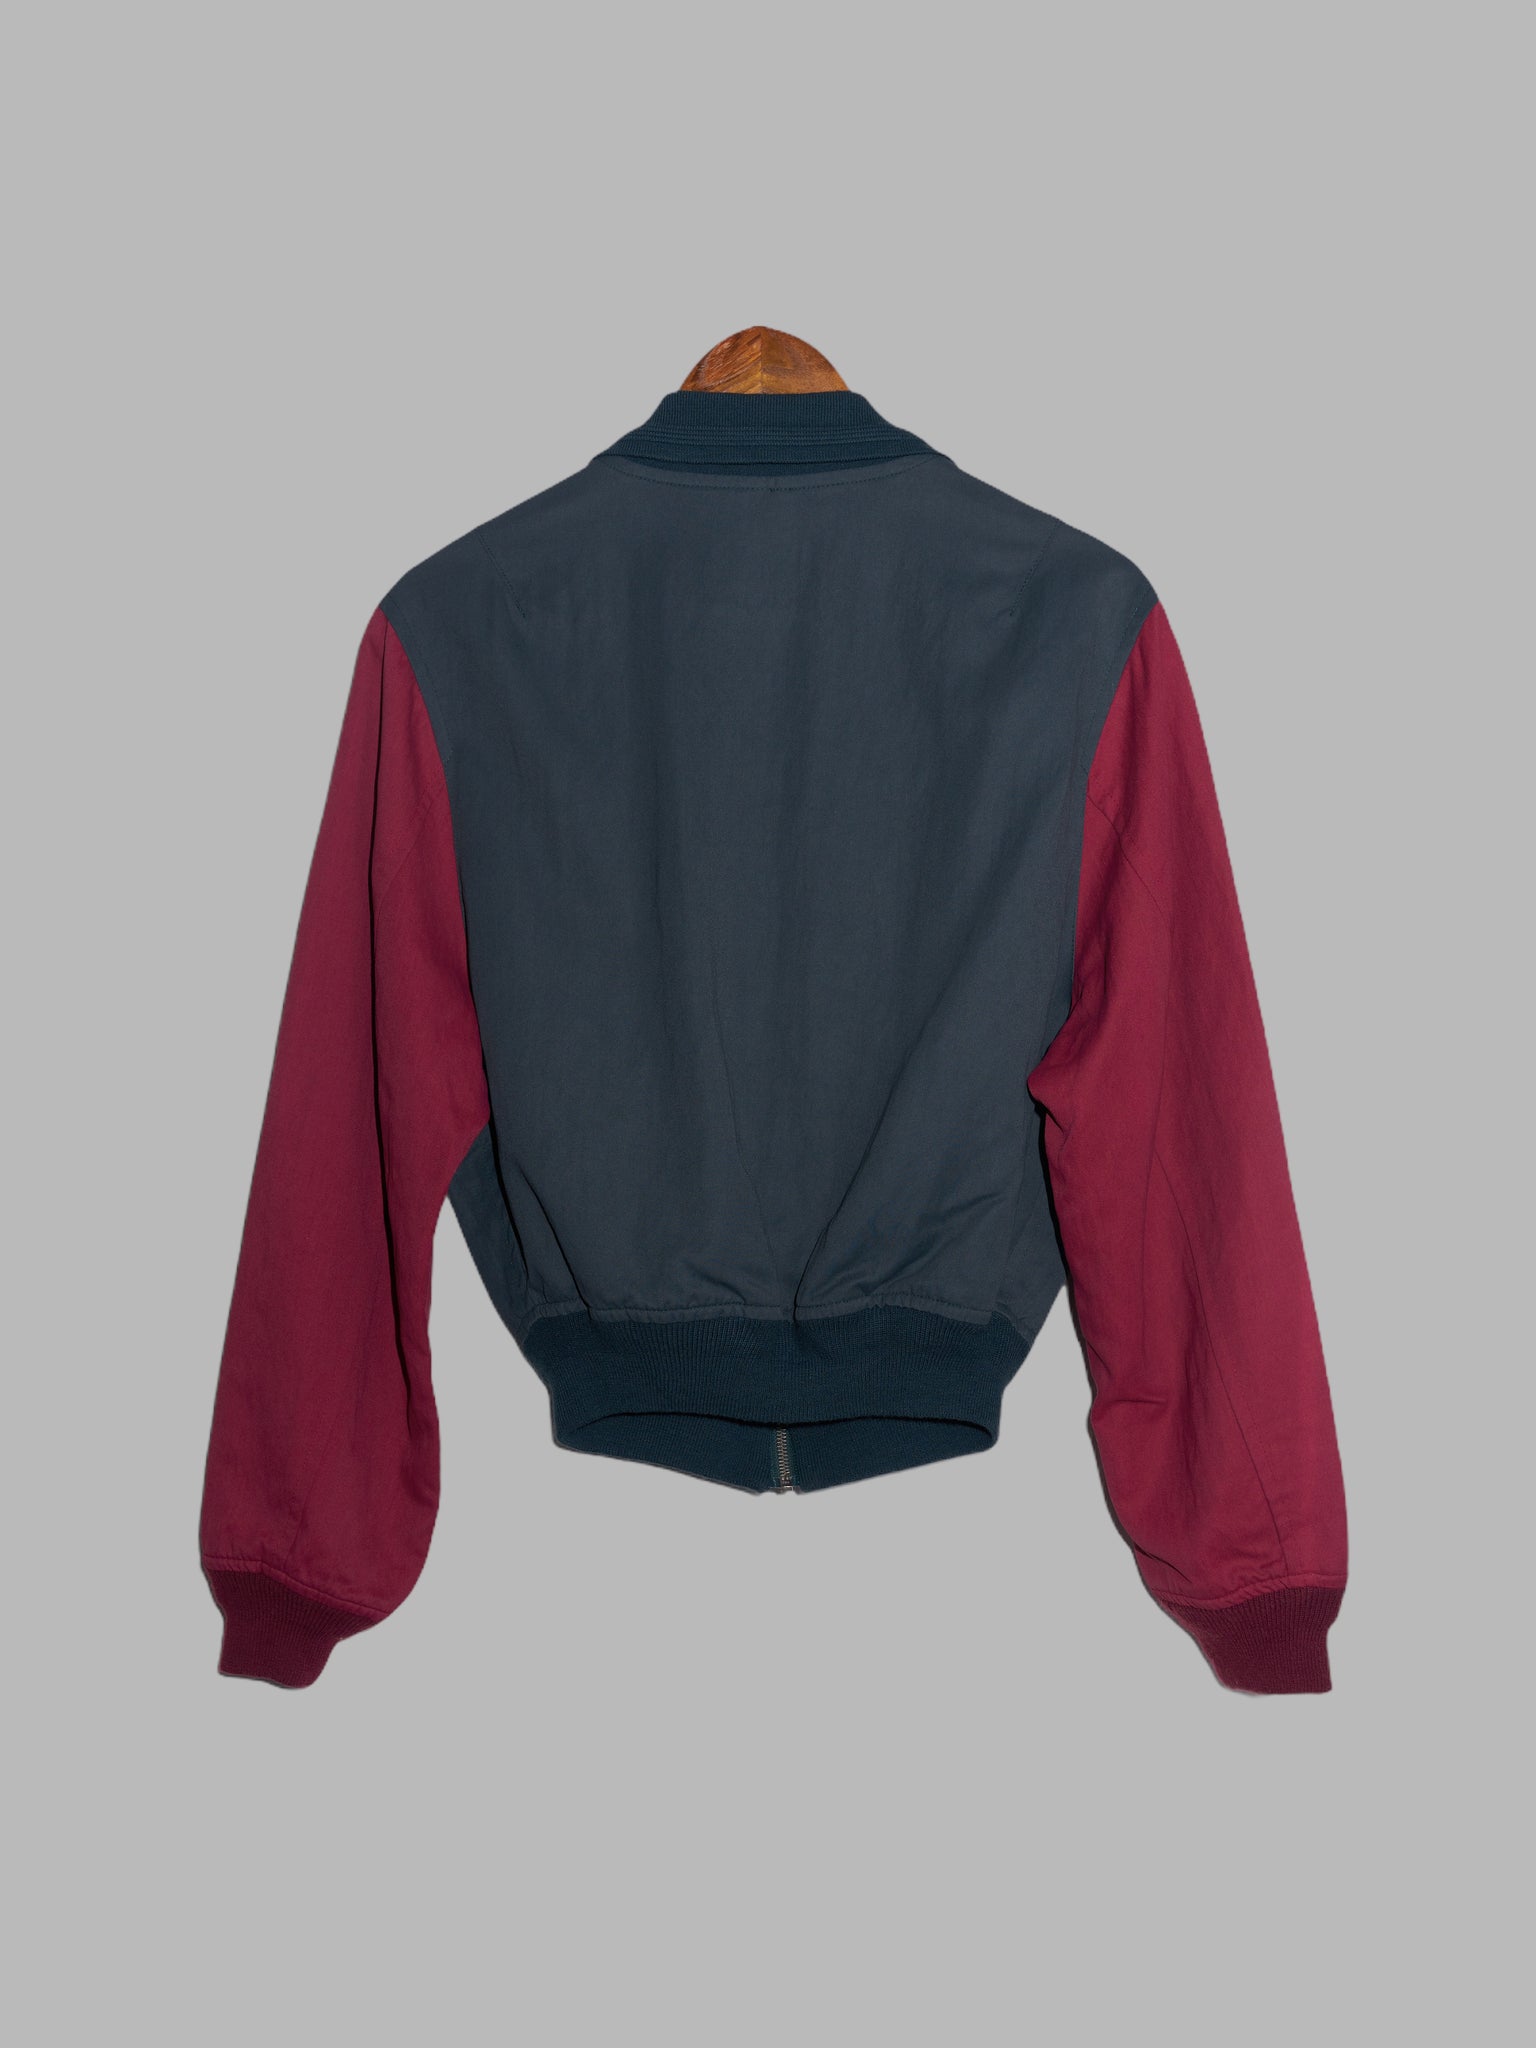 Colin Harvey 1980s green bomber jacket with wine red sleeves - mens S M